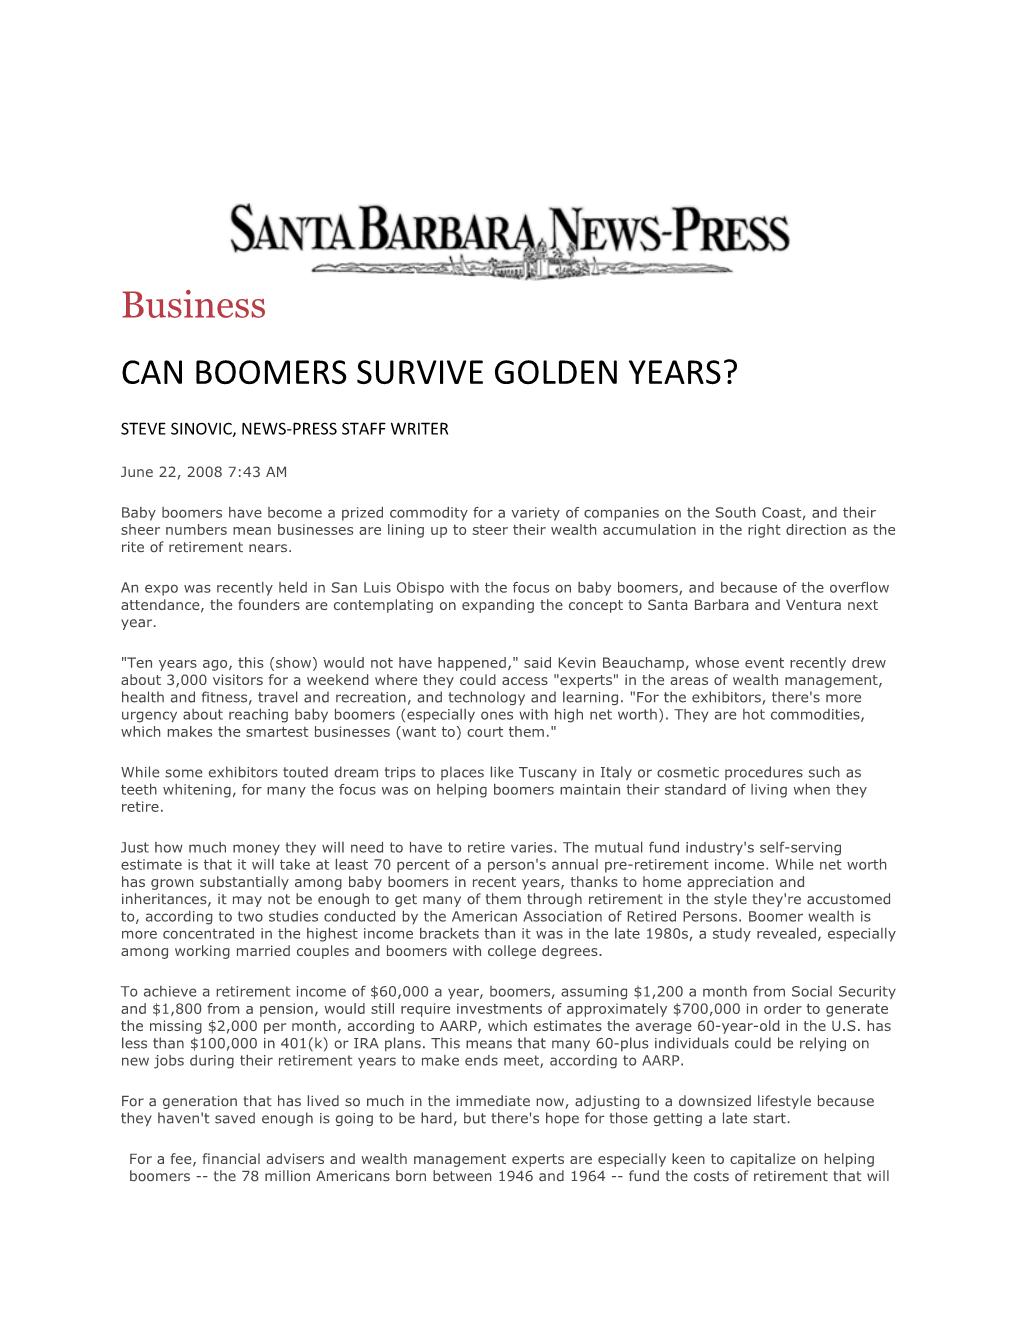 Can Boomers Survive Golden Years?